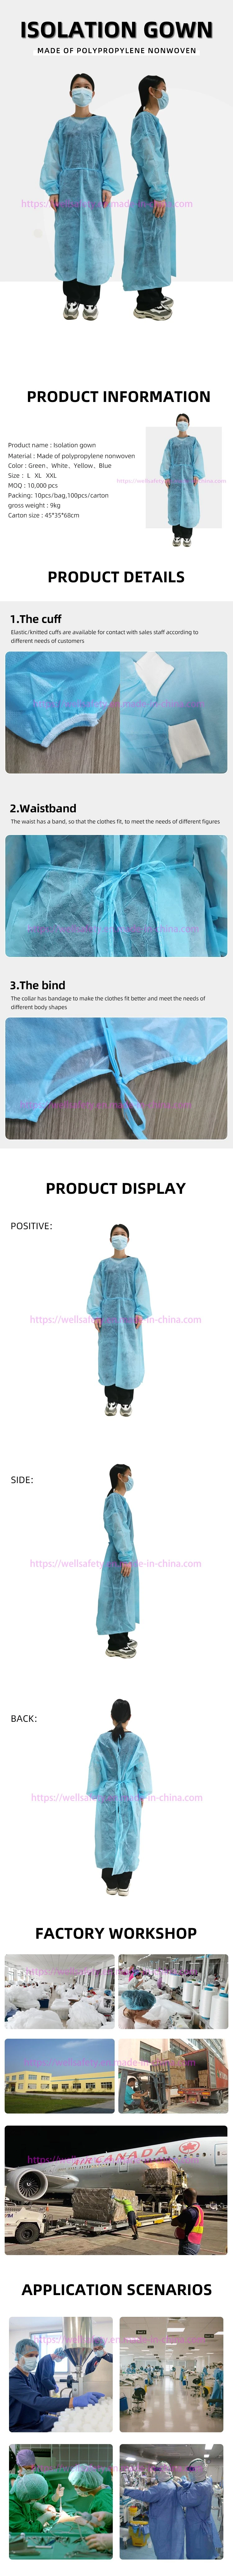 ISO SGS En13485 En13795 AAMI Disposable Gowns and Isolation Gown PP + PE & SMS + PE Non Woven Garment Bags Gown Wholesale ASTM Approve Hospital@ Uniforms